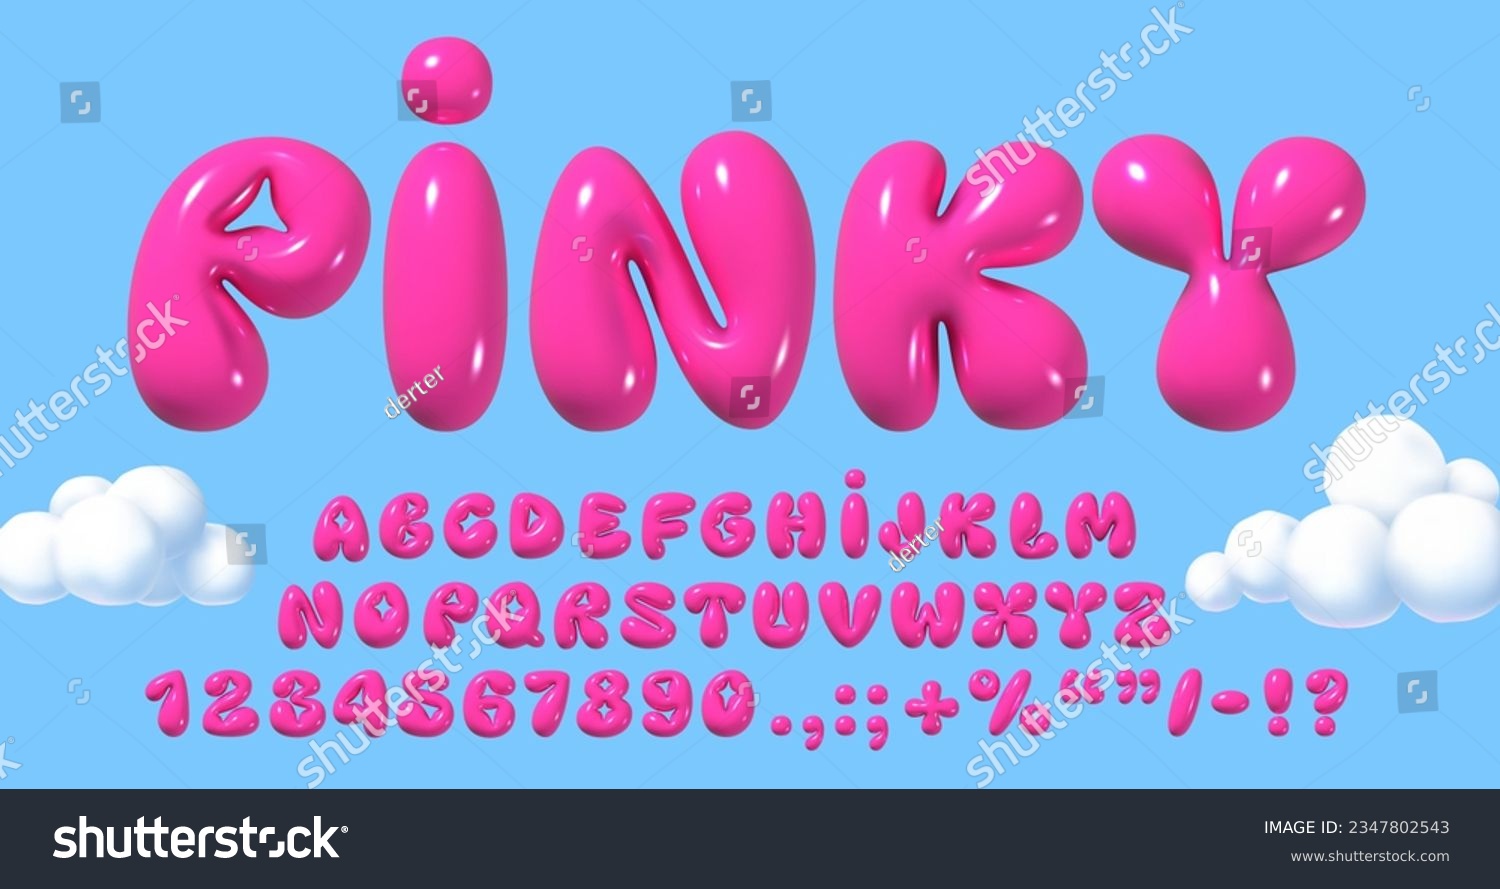 Glossy 3D pink bubble font in Y2K style. Playful design inspired by 2000s or 90s, inflated balloon letters. Trendy English type. Realistic vector illustration #2347802543